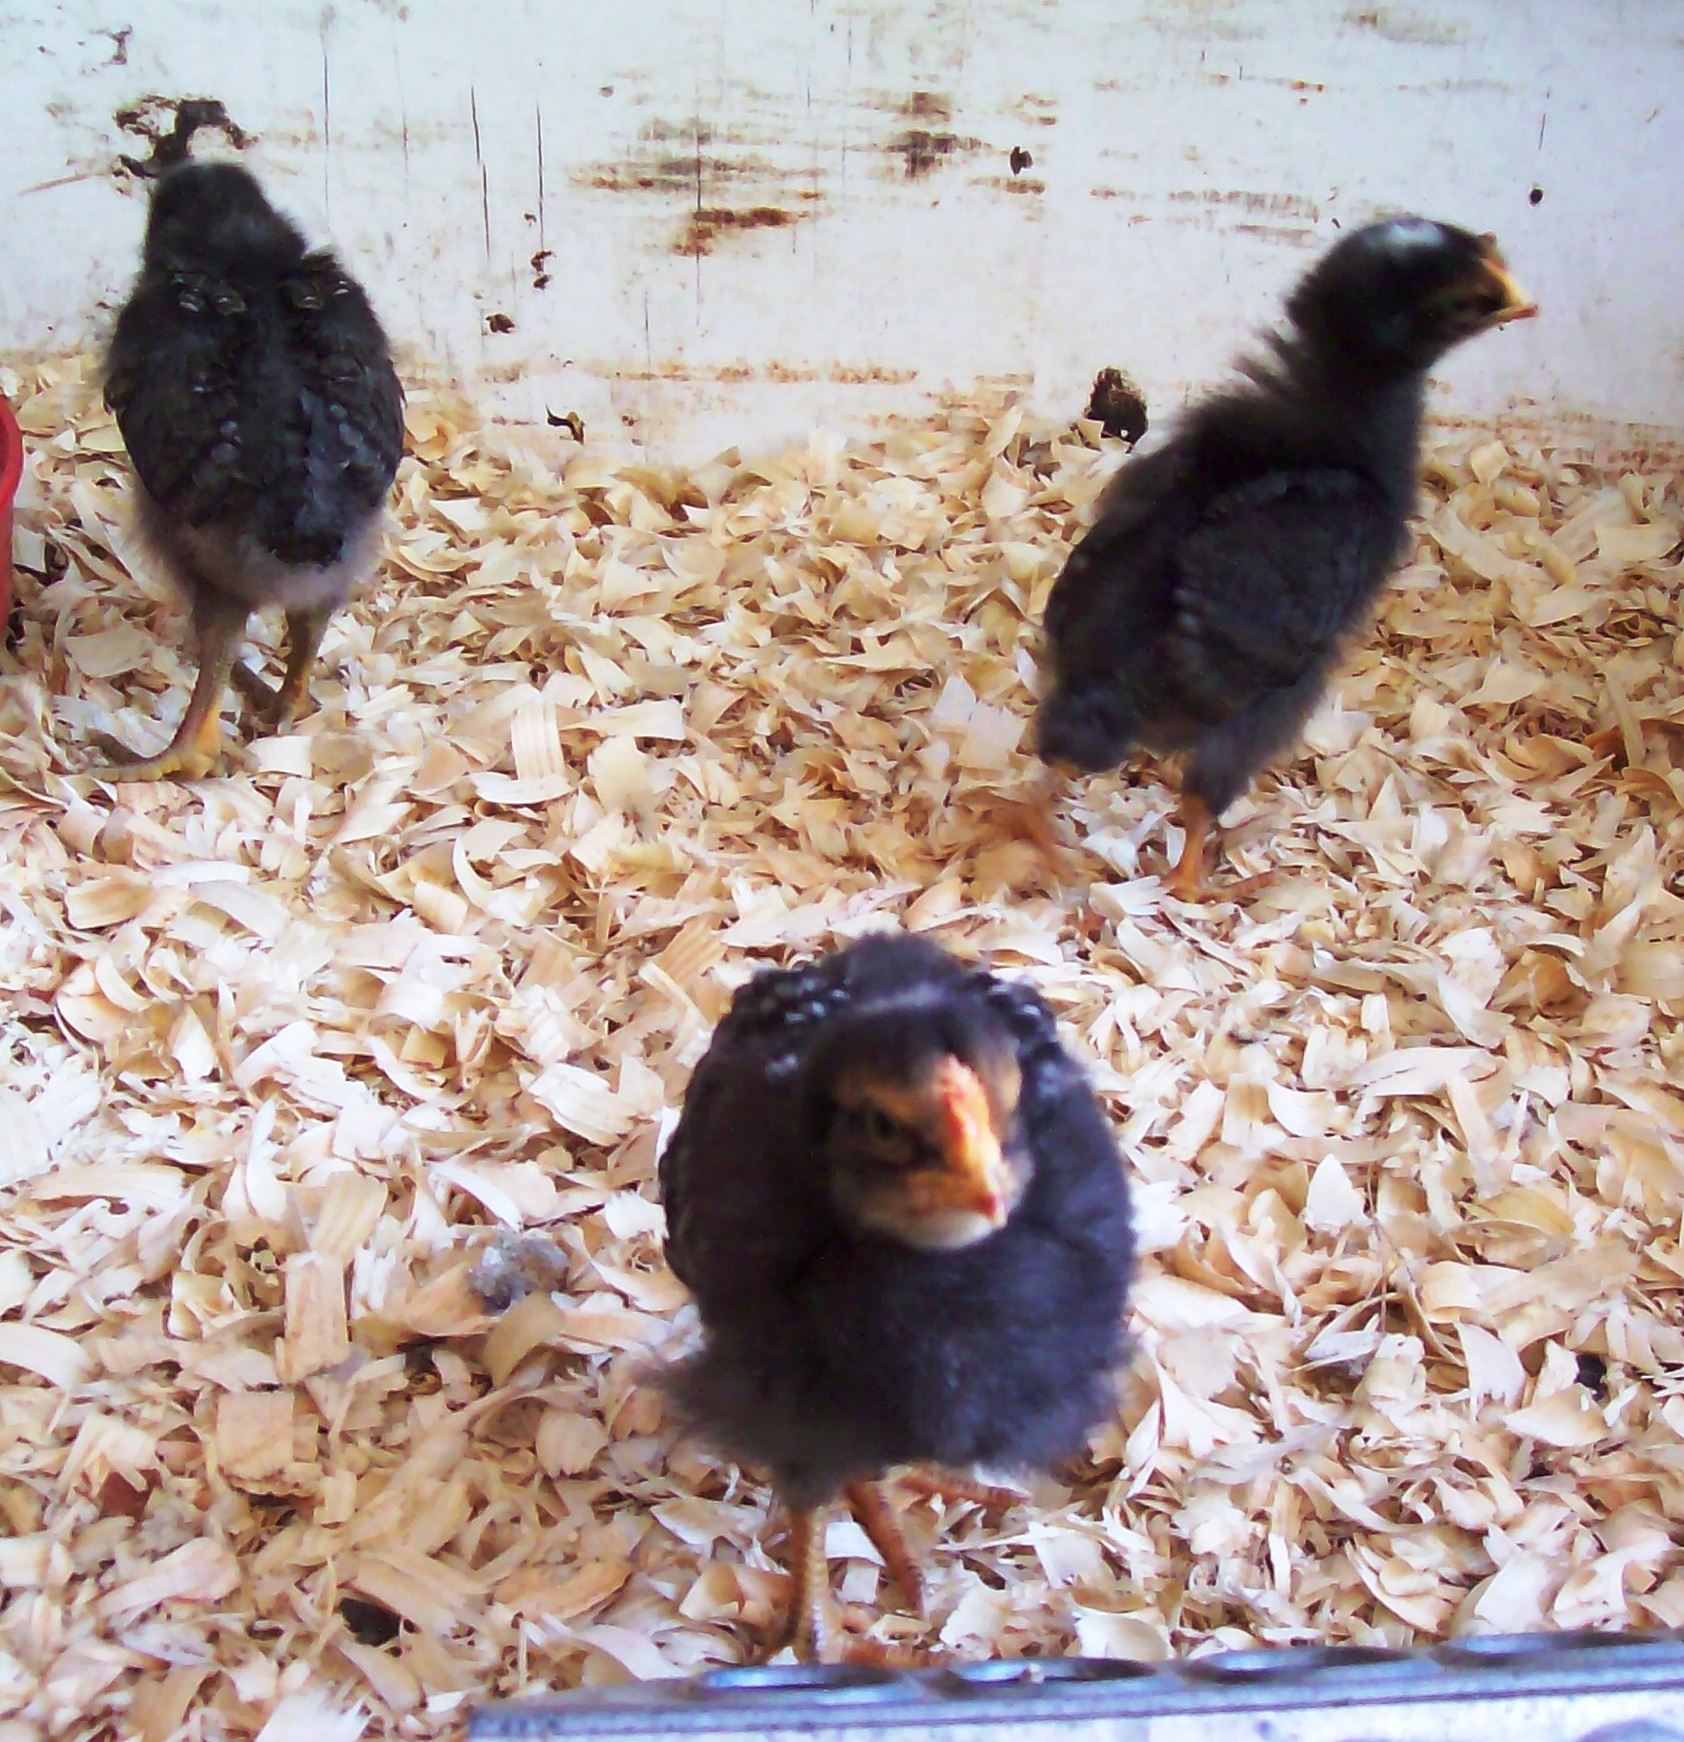 The three amigos before they got their feathers.